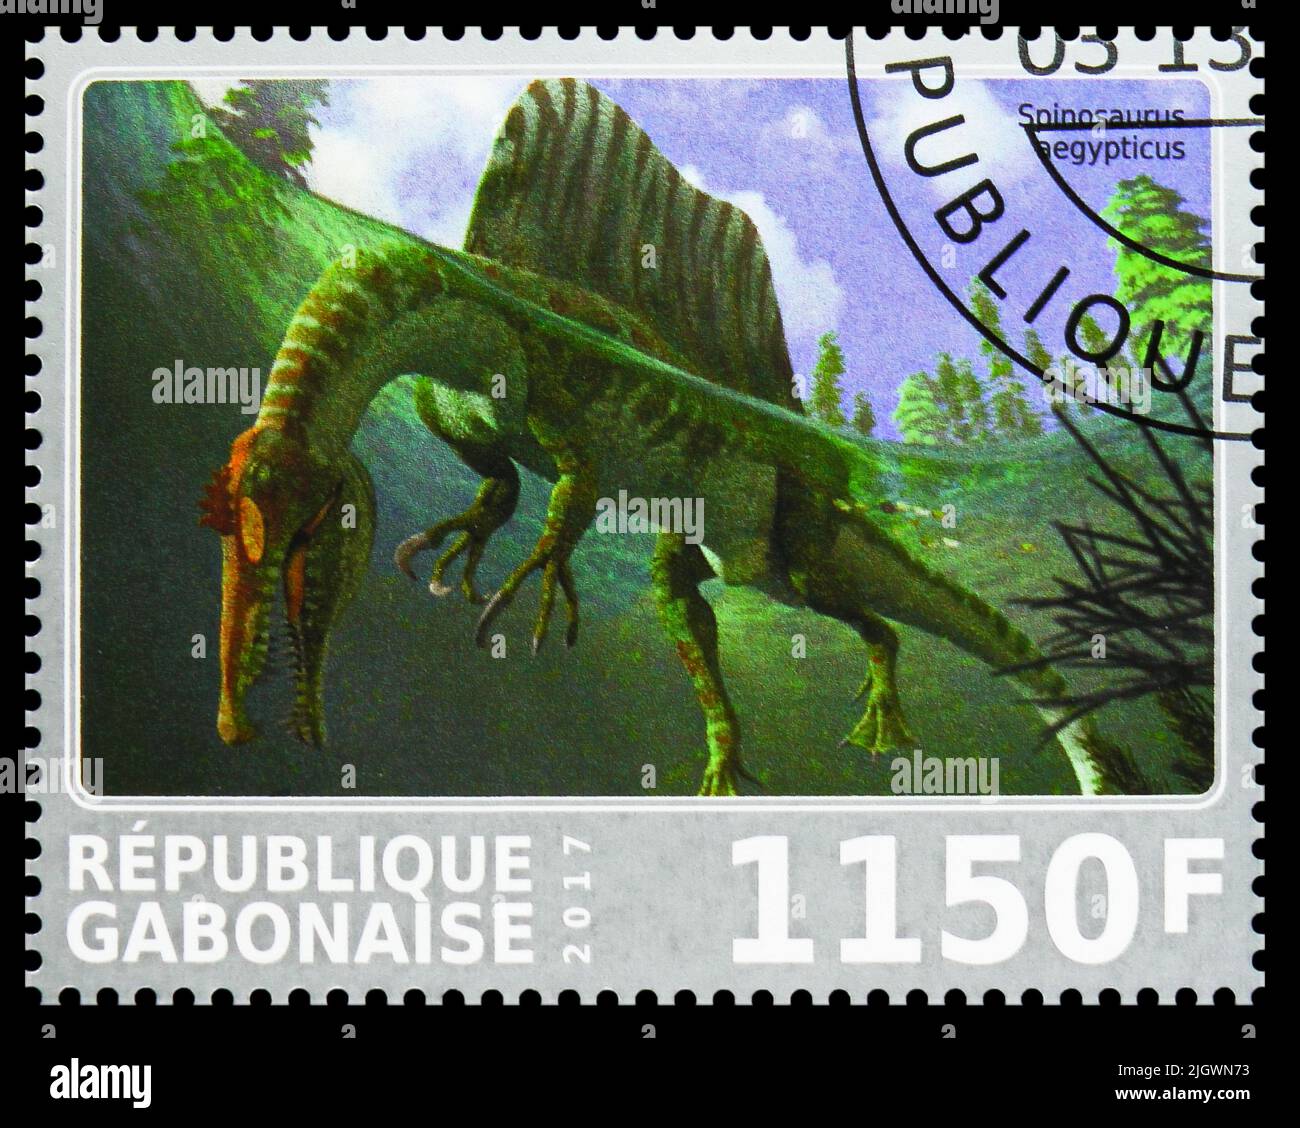 MOSCOW, RUSSIA - JUNE 17, 2022: Postage stamp printed in Gabon shows Spinozaurus aegyptiacus, Dinosaurs serie, circa 2017 Stock Photo